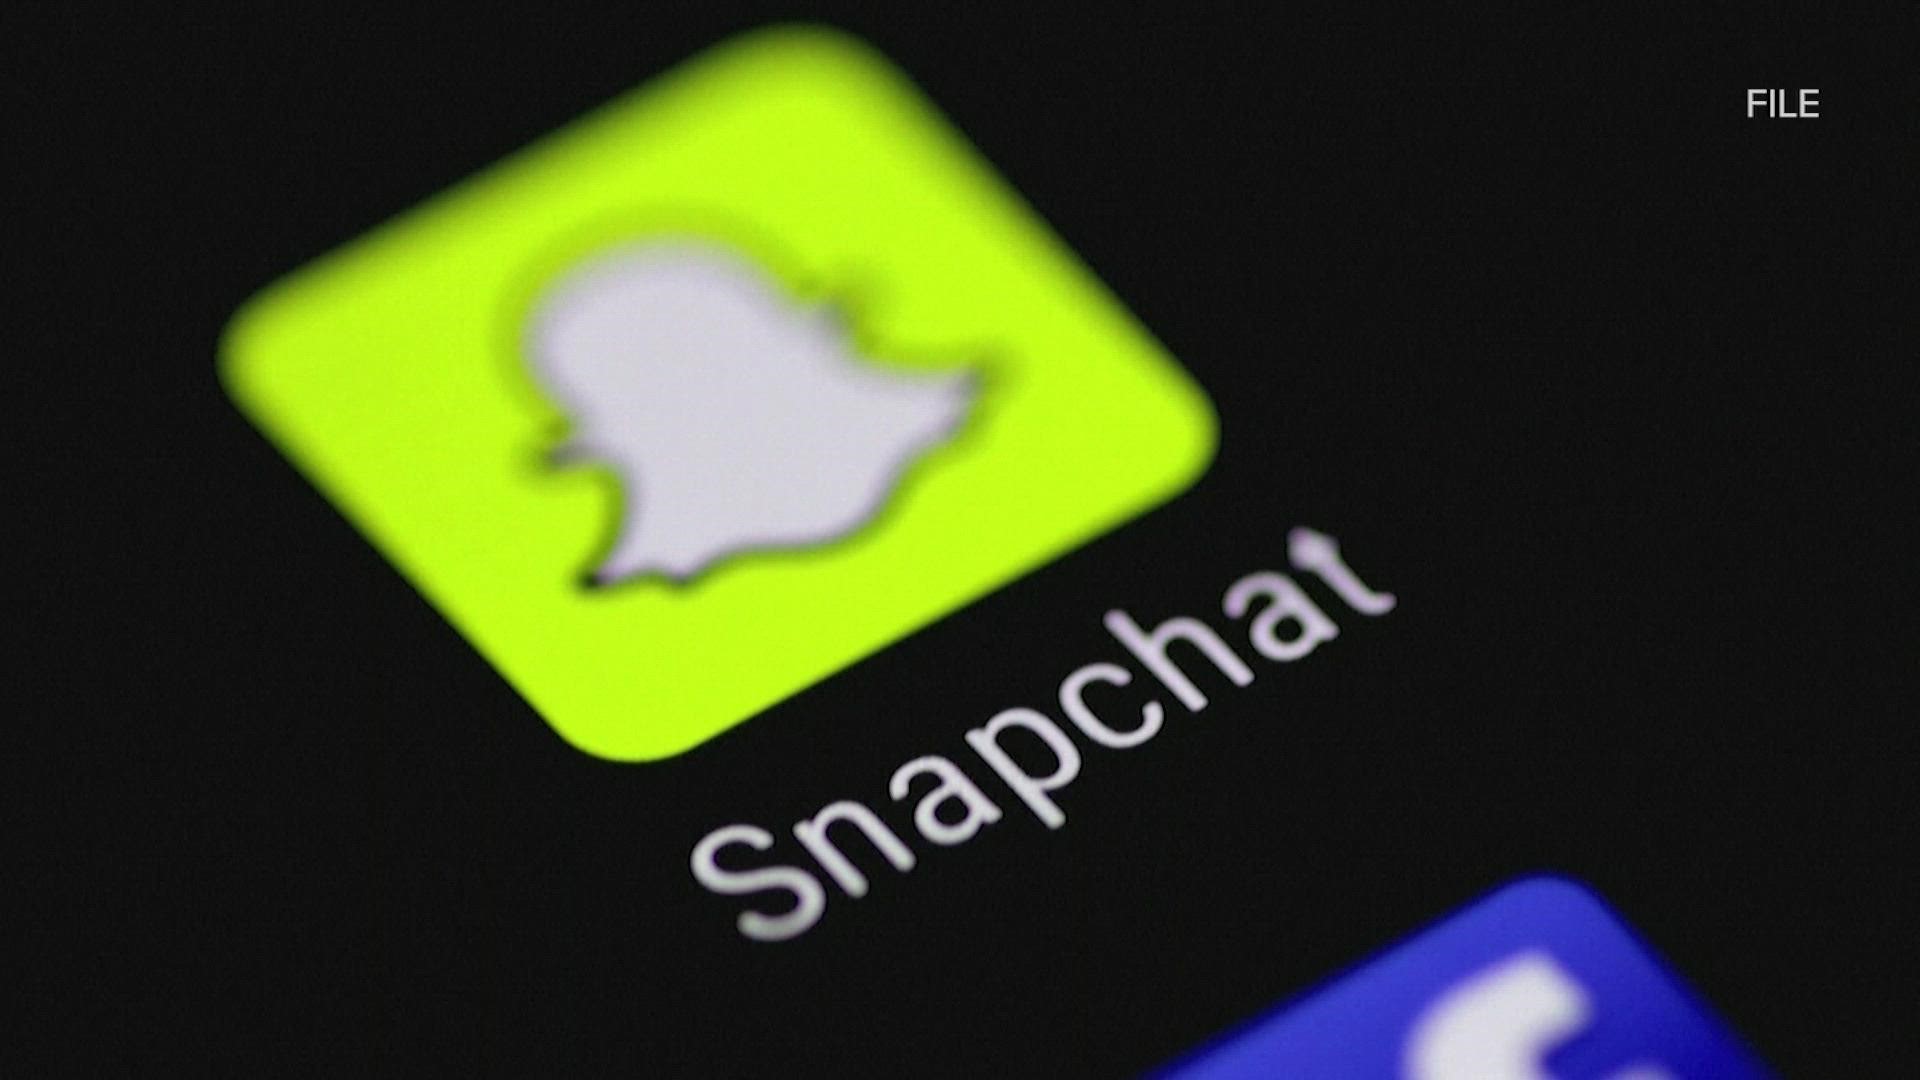 The lawsuit says Snapchat’s design allows sexual predators to target underage children. The teacher, 36-year-old Bonnie Guess-Mazock, is also named.